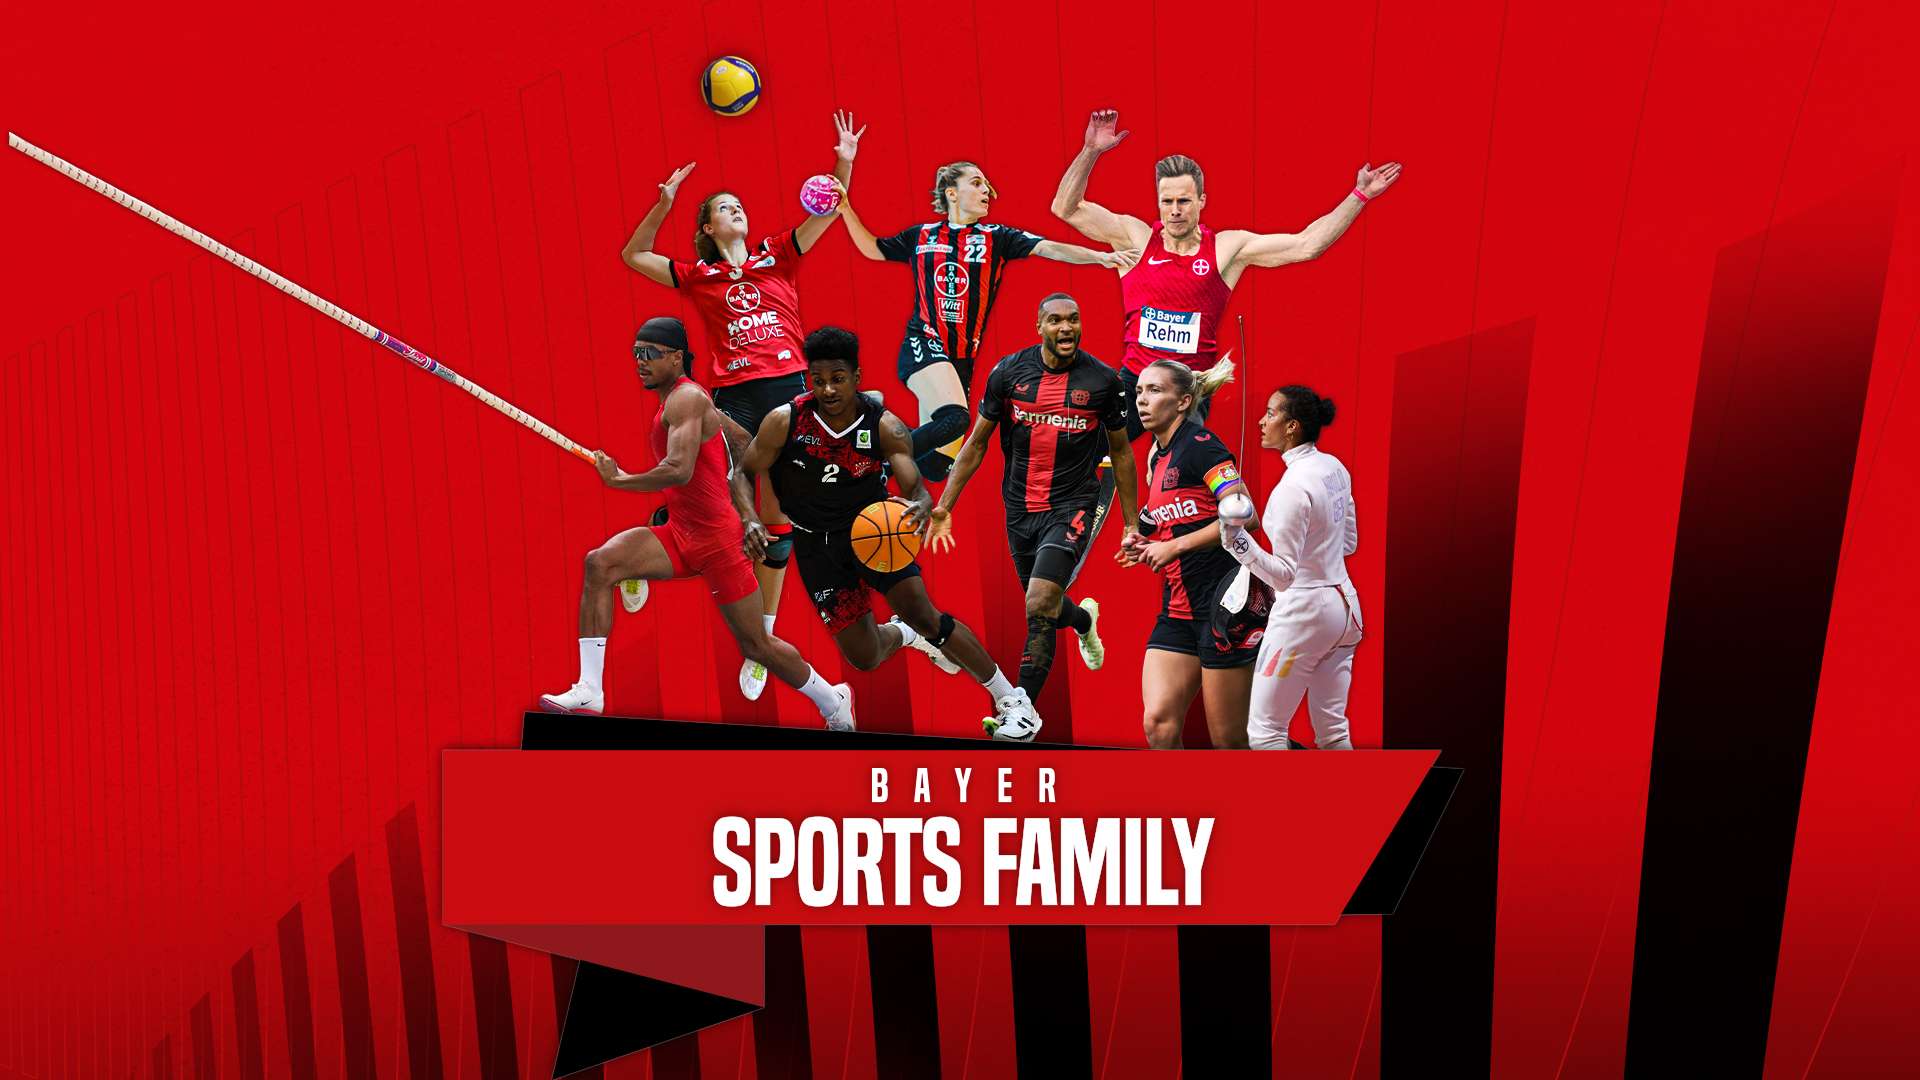 Bayer Sports Family